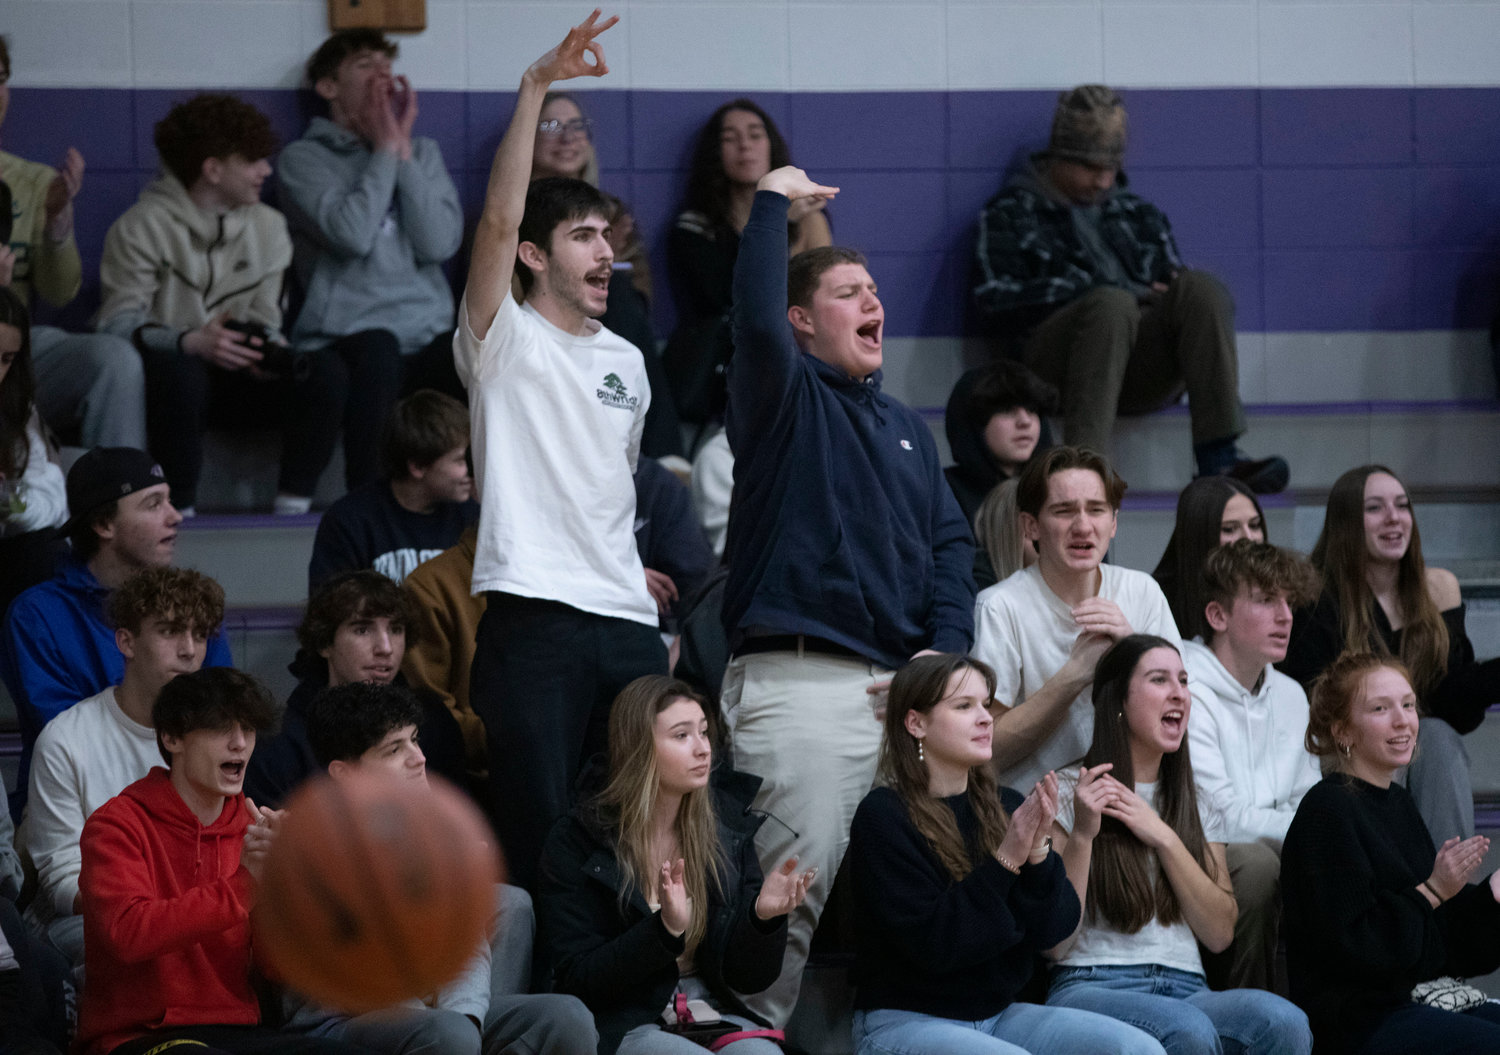 James Rustici, George Piper, Jamison Canario and the dog pound cheer on the Huskies.